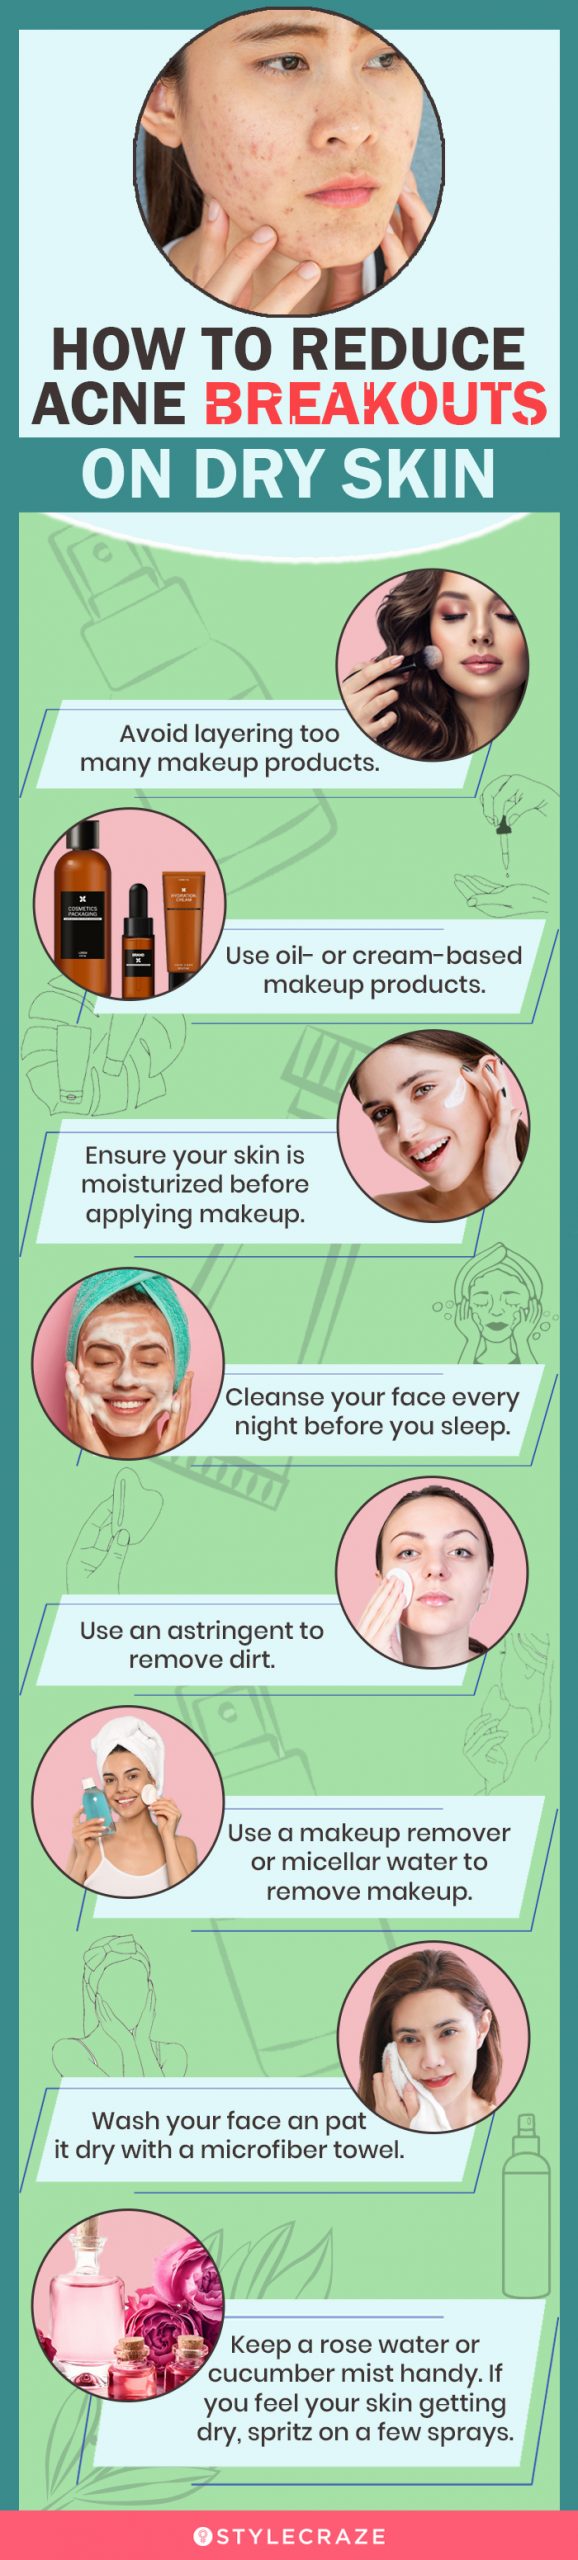 how to reduce dry skin acne breakouts [infographic]